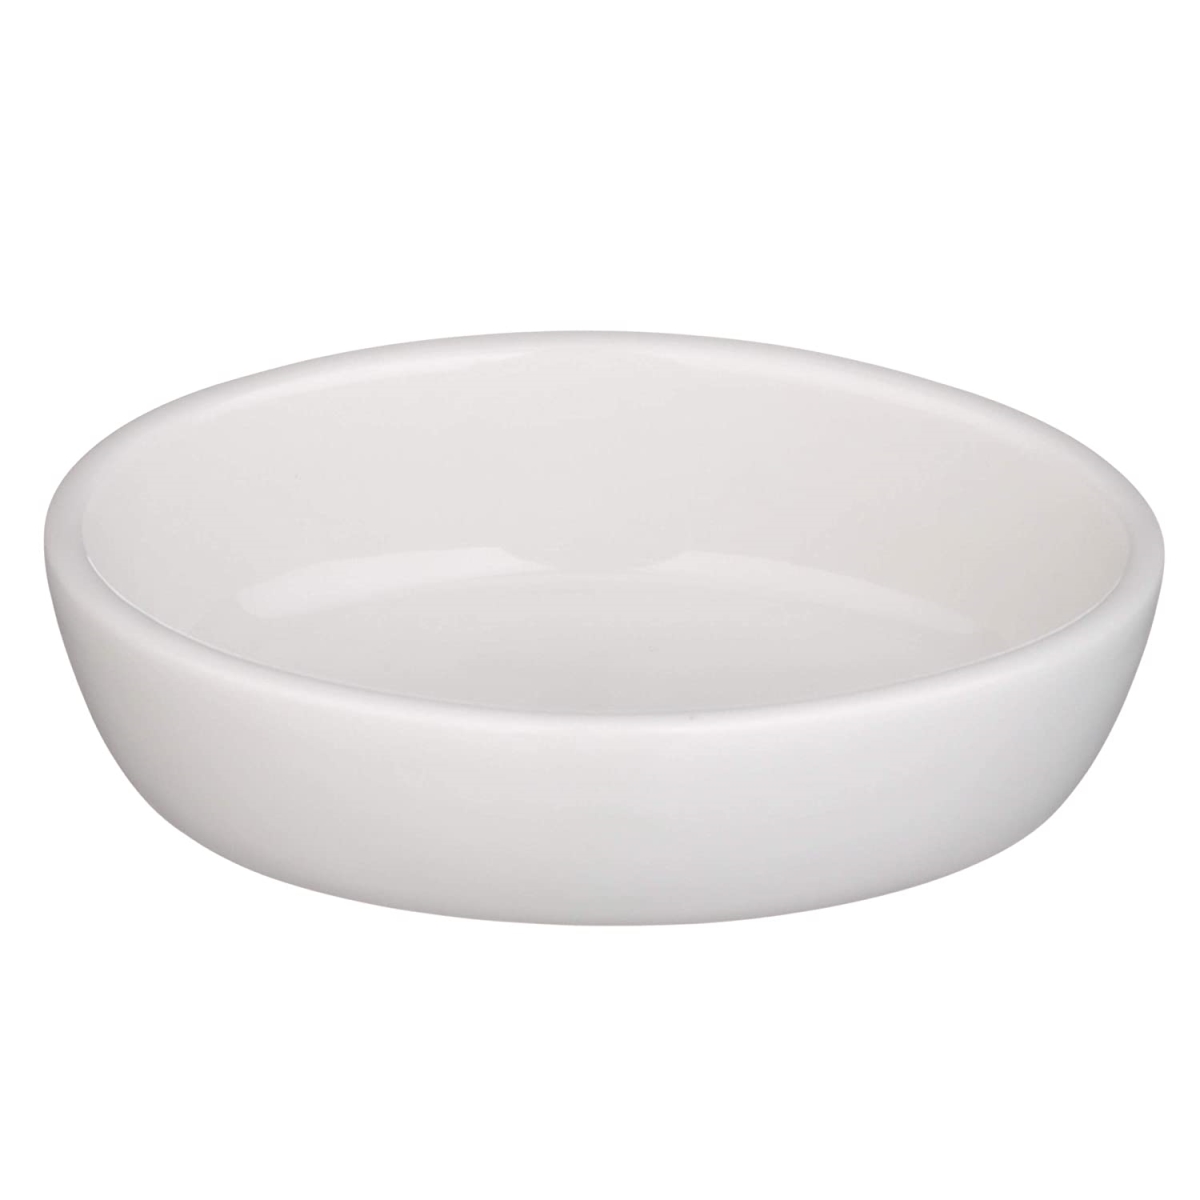 Picture of Oneida F1400000632 12 oz Tundra Oval Baker Dish